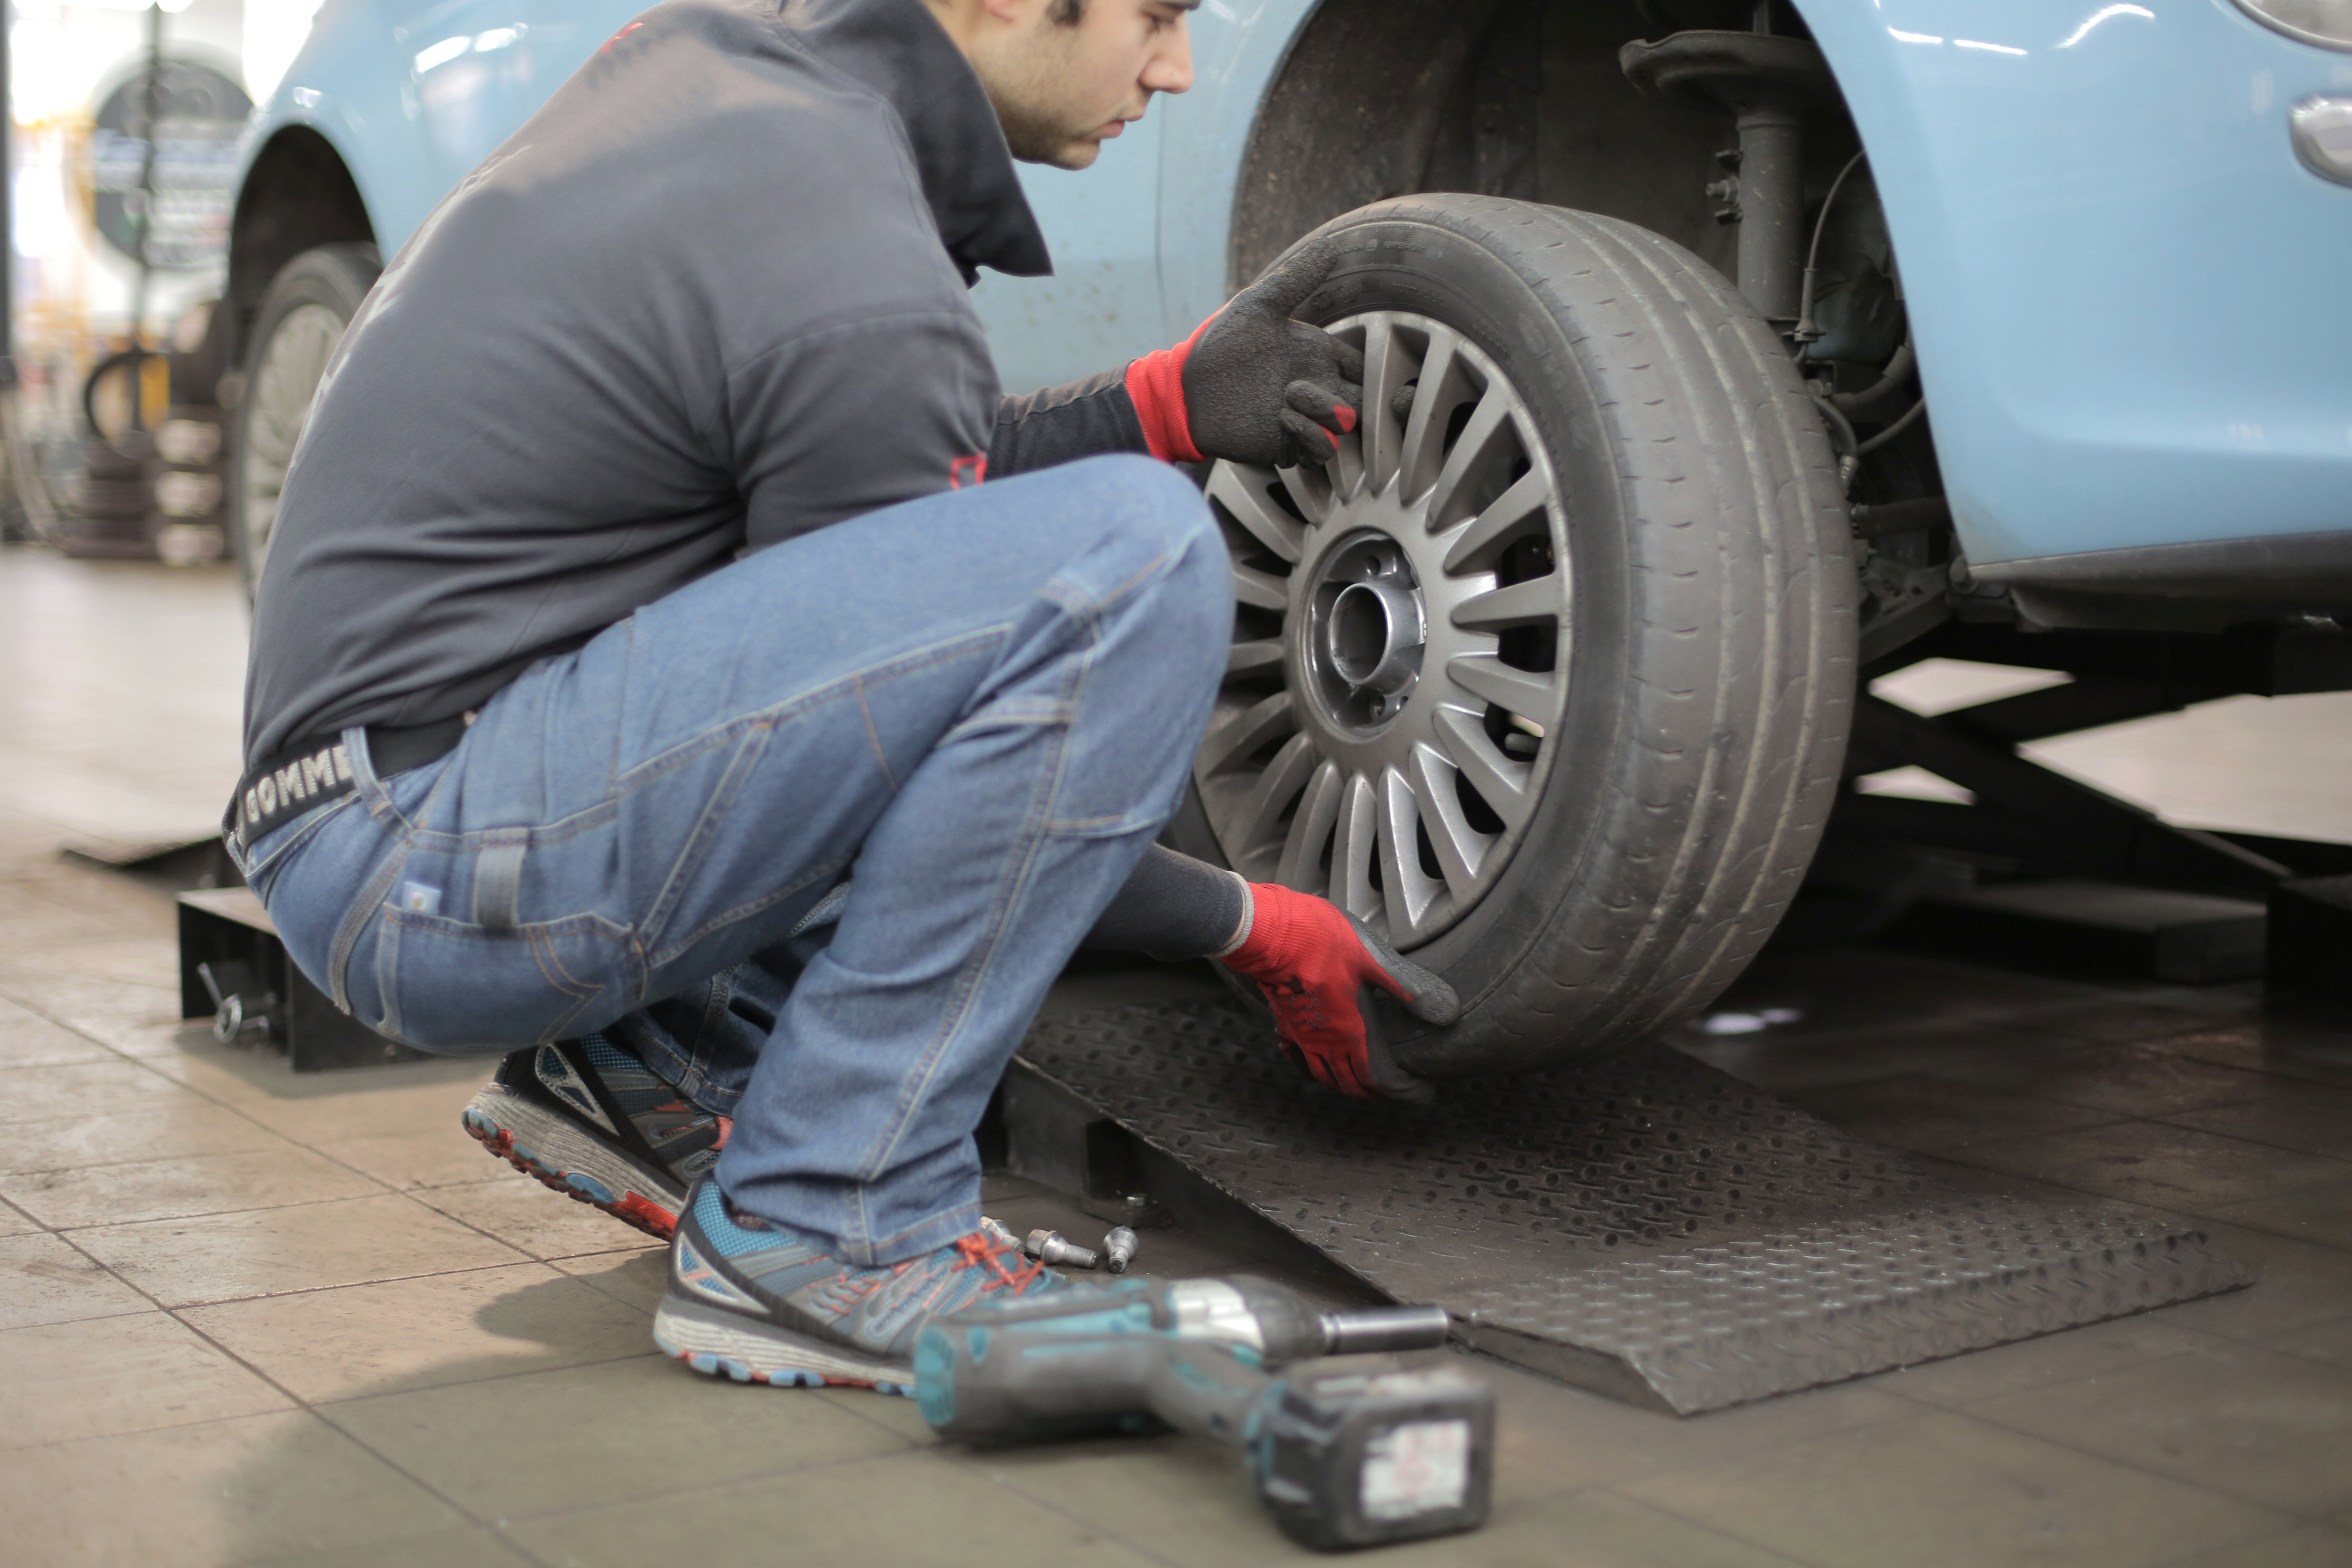 Pictured - A photo of a man changing a tire wearing jeans, a gray jacket and matching gloves | Source: Pexels 